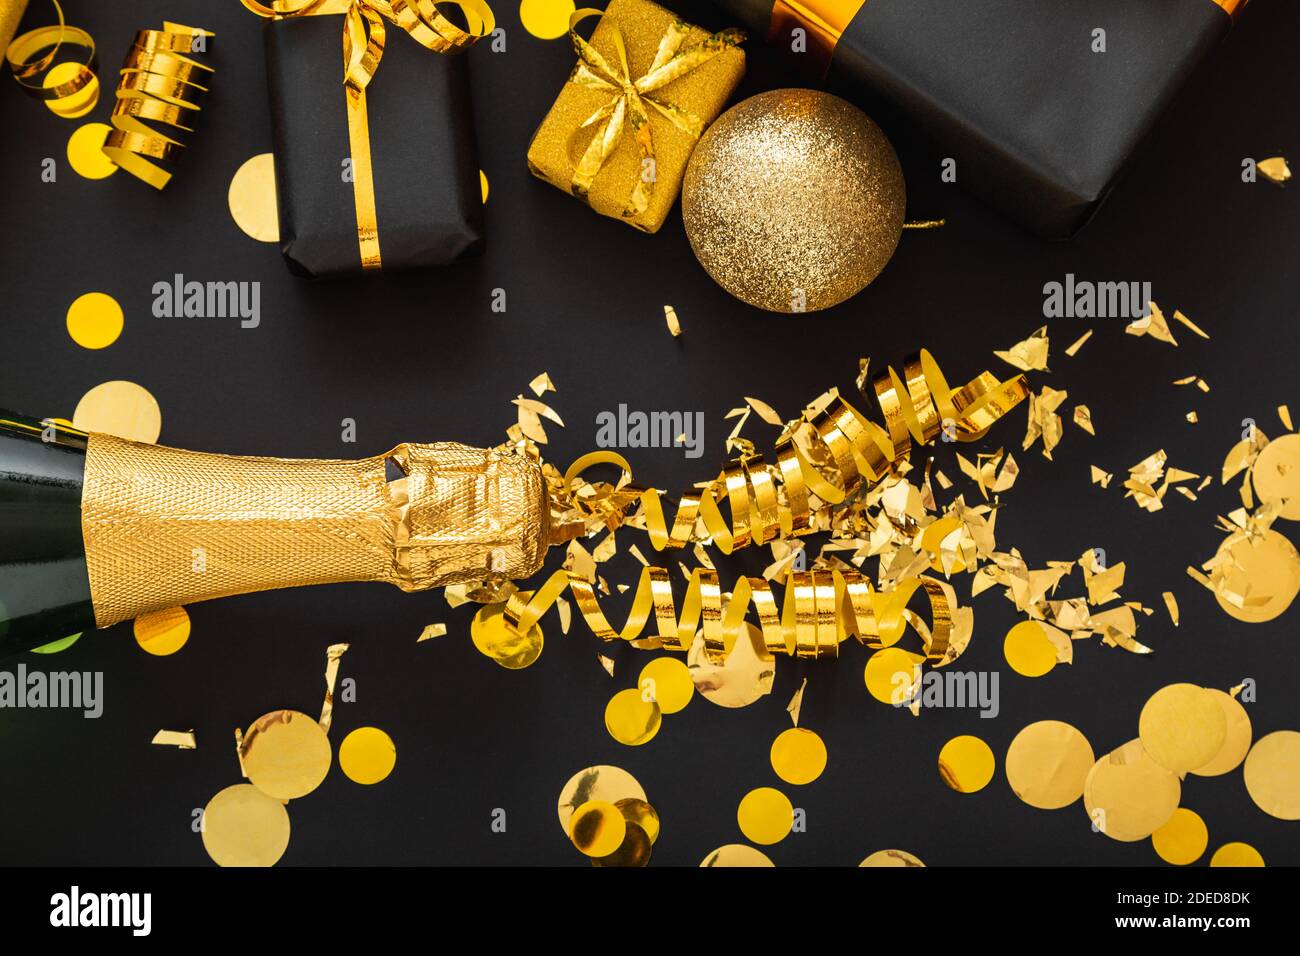 Golden bottle of champagne spills out gold sparkles in frame of gold festive Christmas decor confetti balls gifts on black background. Flat lay New Stock Photo